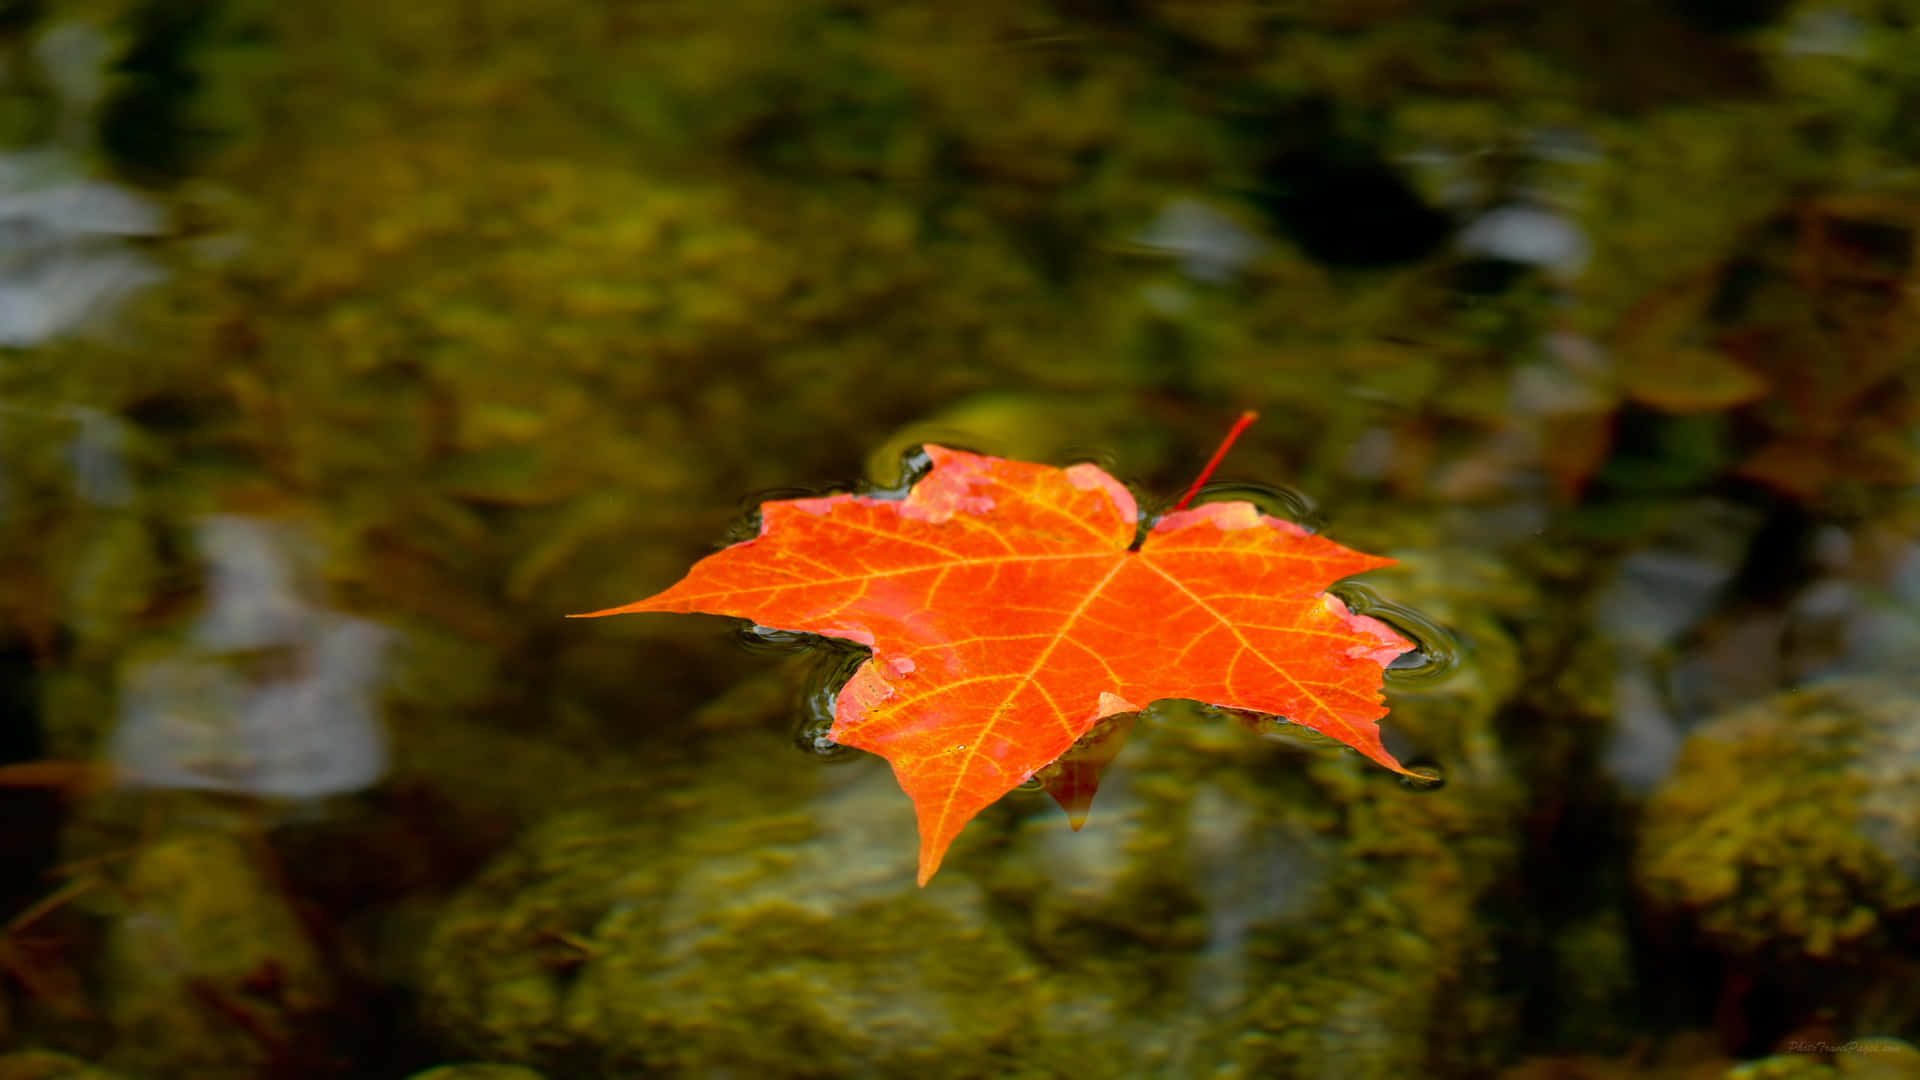 A view of a Maple Leaf on a sunny day